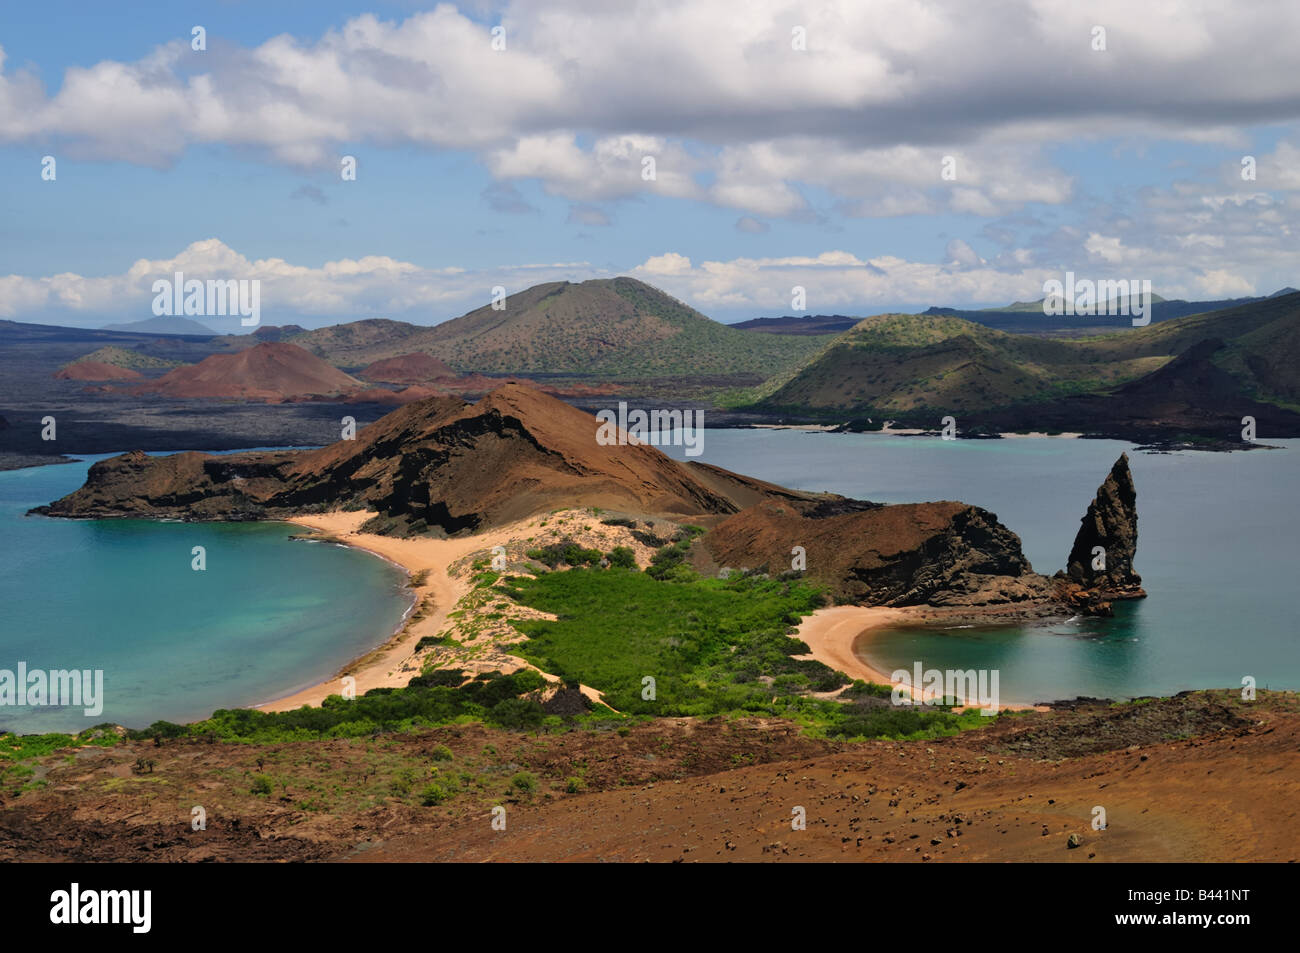 Bartolome Island is home to the famous landmark Pinnacle Rock. The angular rock juts out into tropical blue waters. Stock Photo